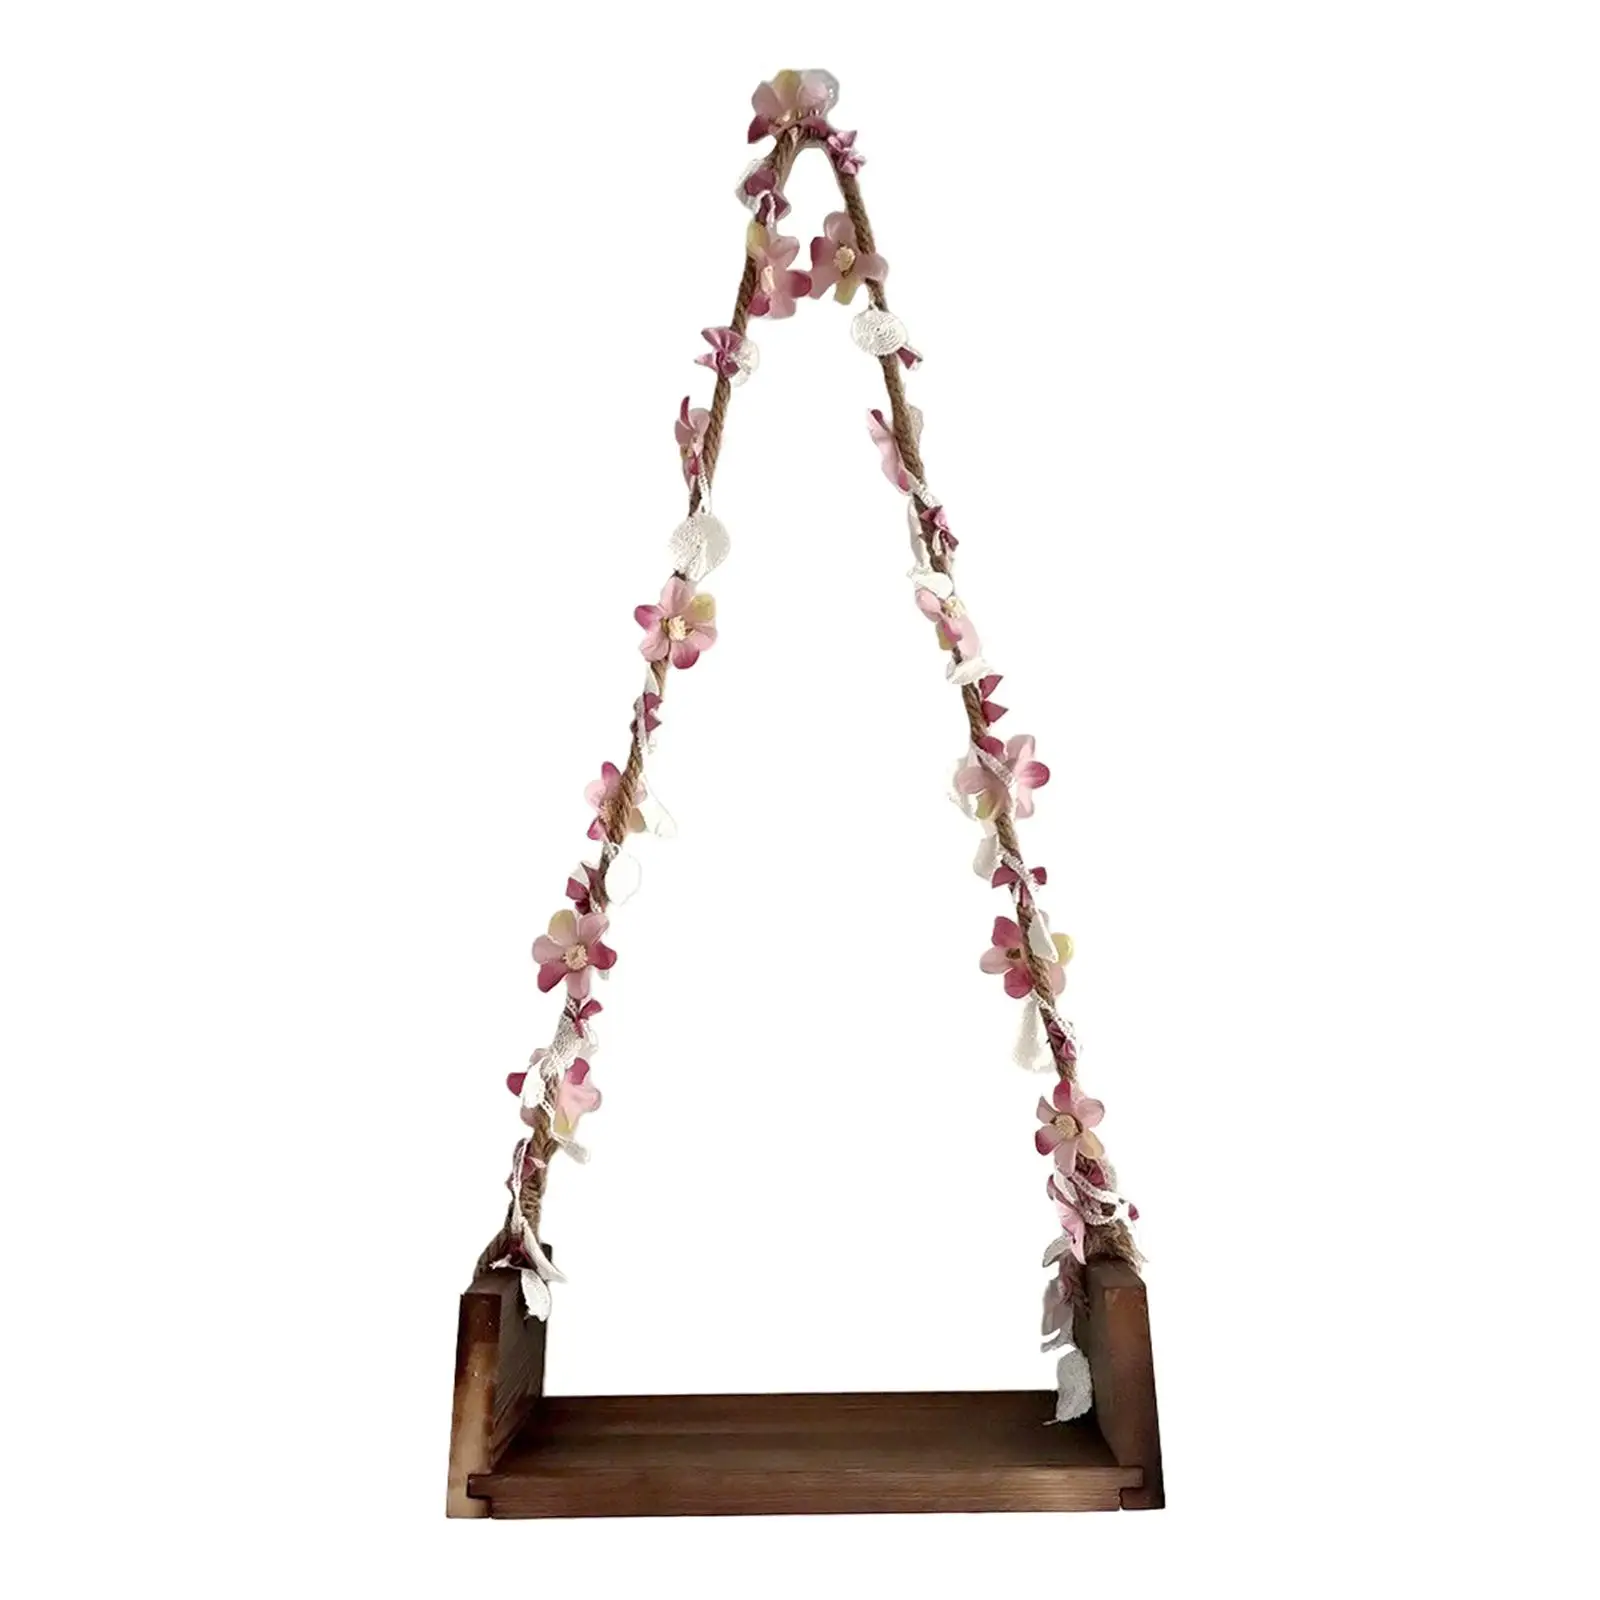 Wooden Swing Seats Photo Posing Aid with Flower Vine for Infants Baby Boys